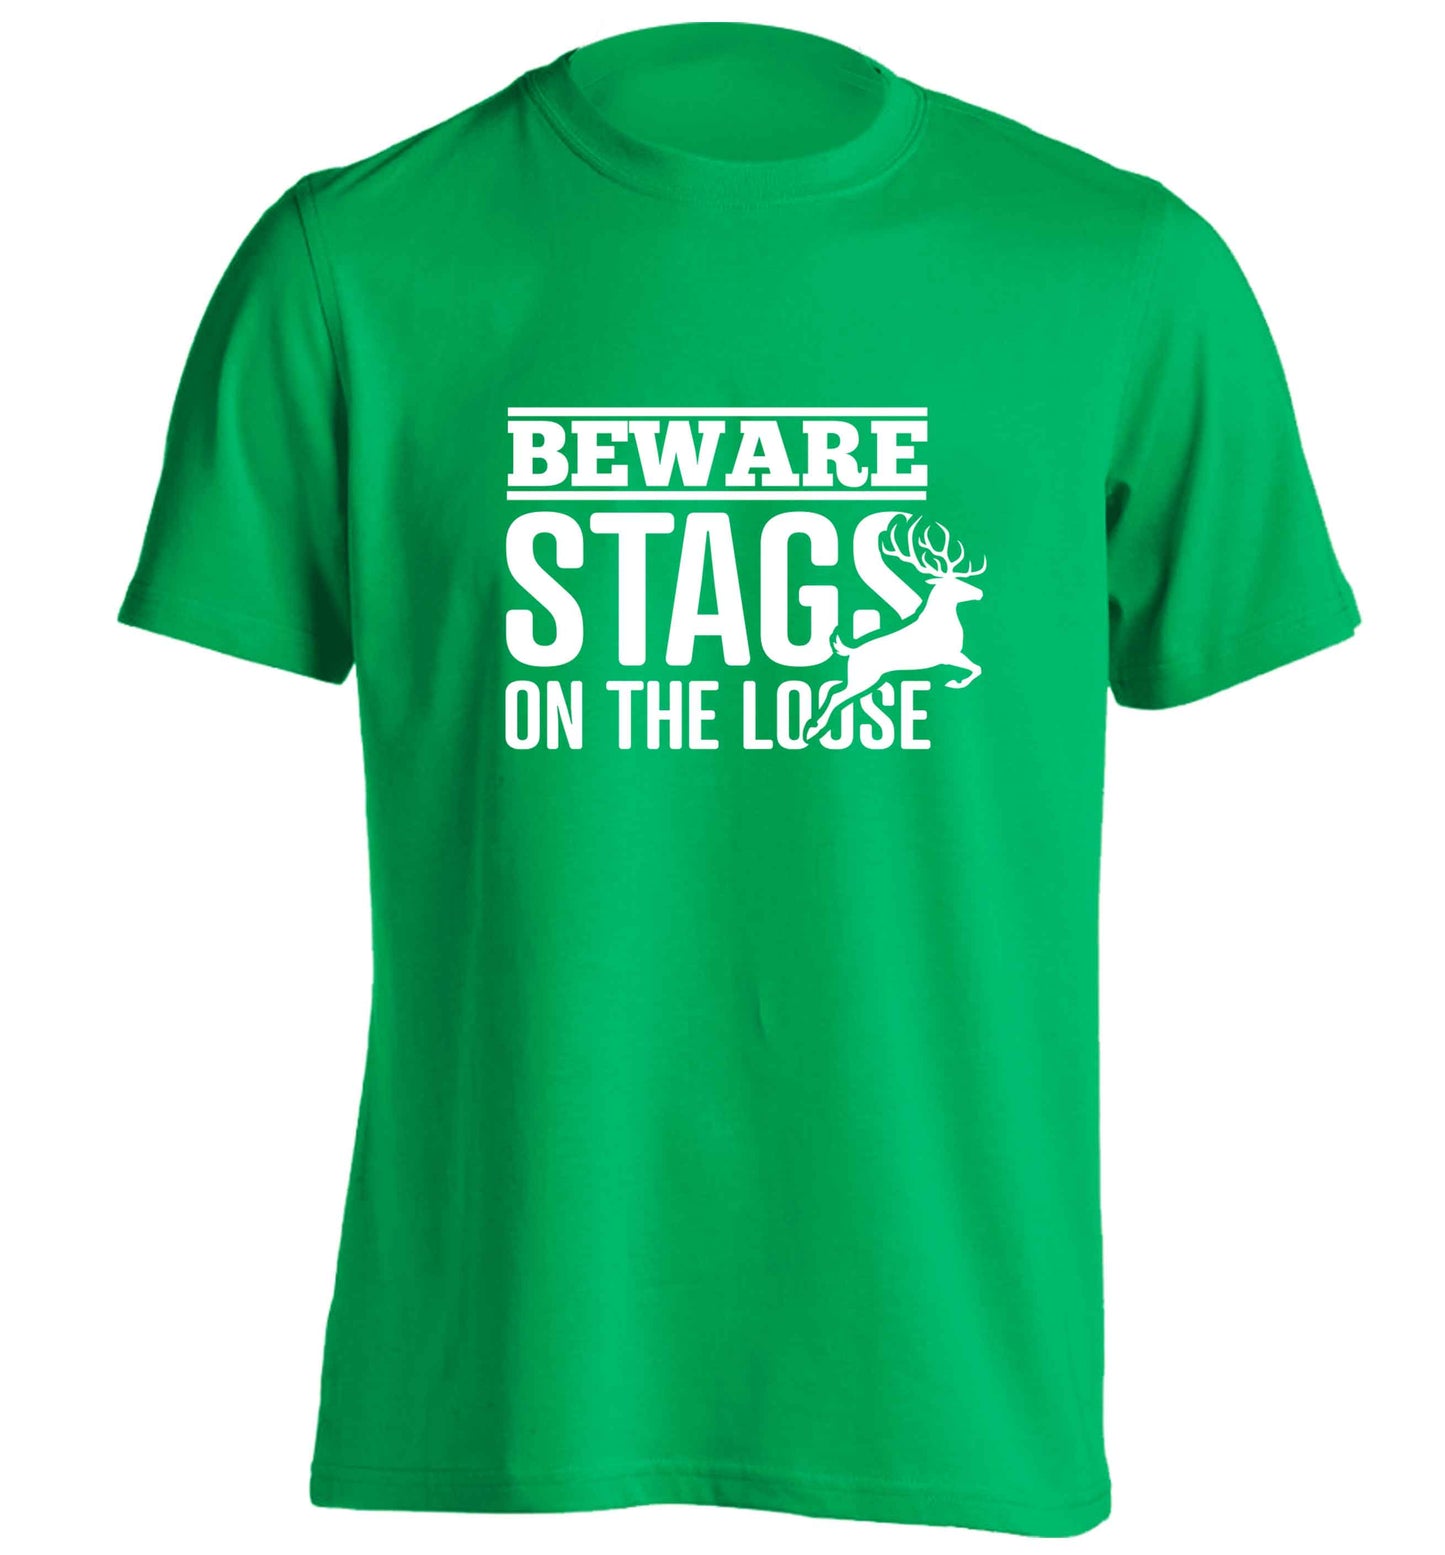 Beware stags on the loose adults unisex green Tshirt 2XL